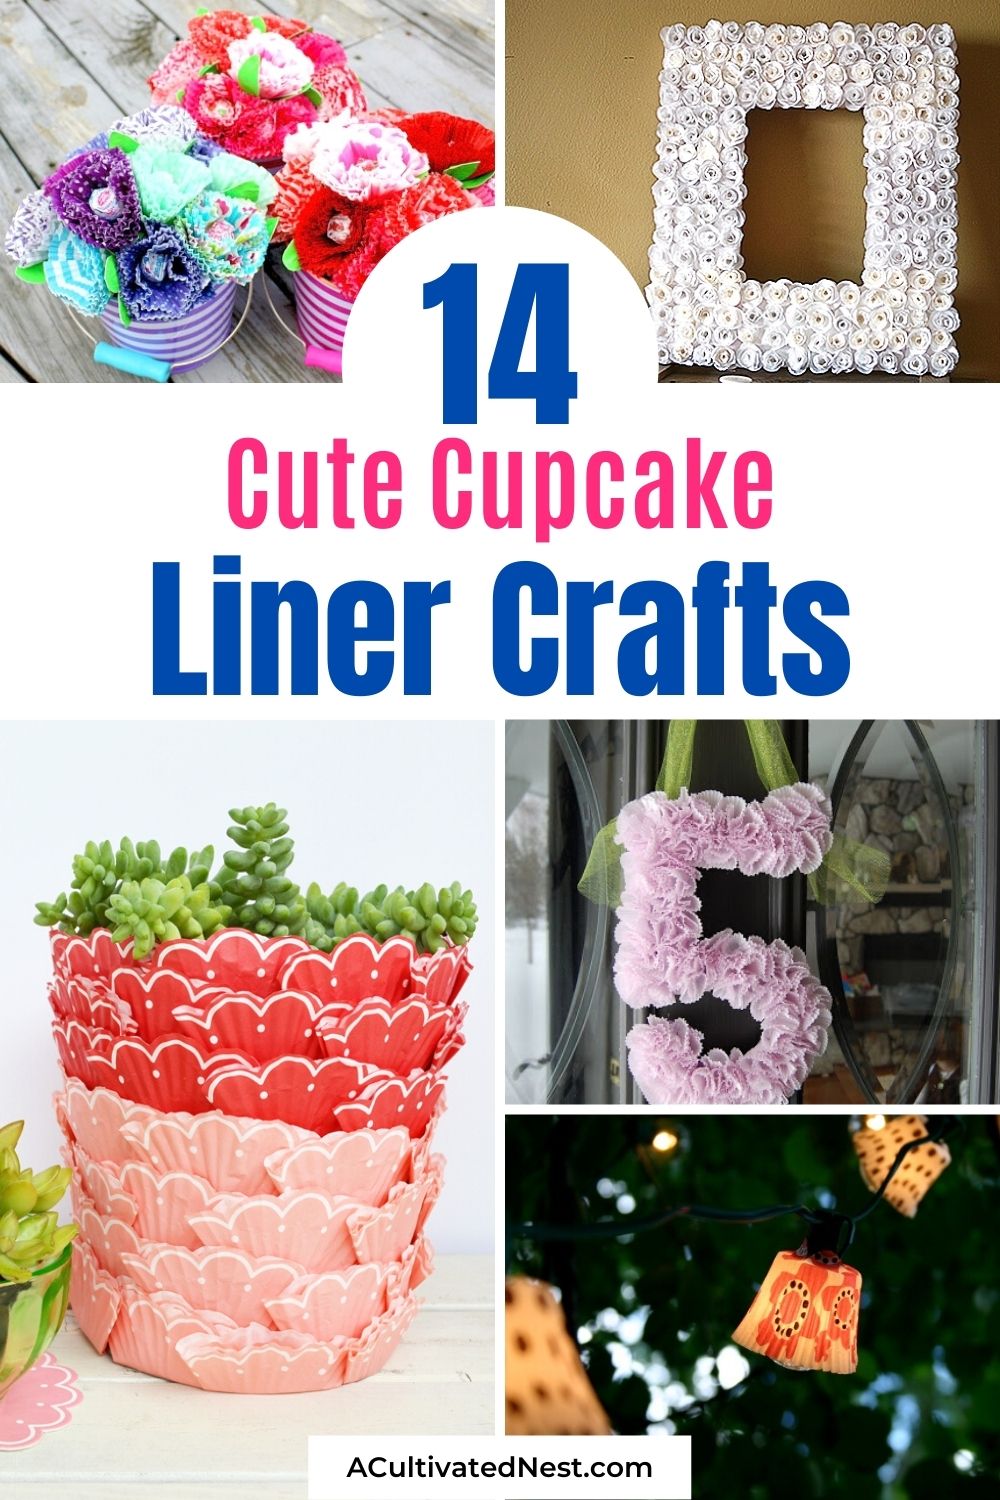 14 Cute Cupcake Liner Crafts- If you want an inexpensive and cute crafting material, you need to try cupcake liners! Get inspired with these cupcake liner crafts! | #upcycle #crafts #diyProjects #craftProjects #ACultivatedNest